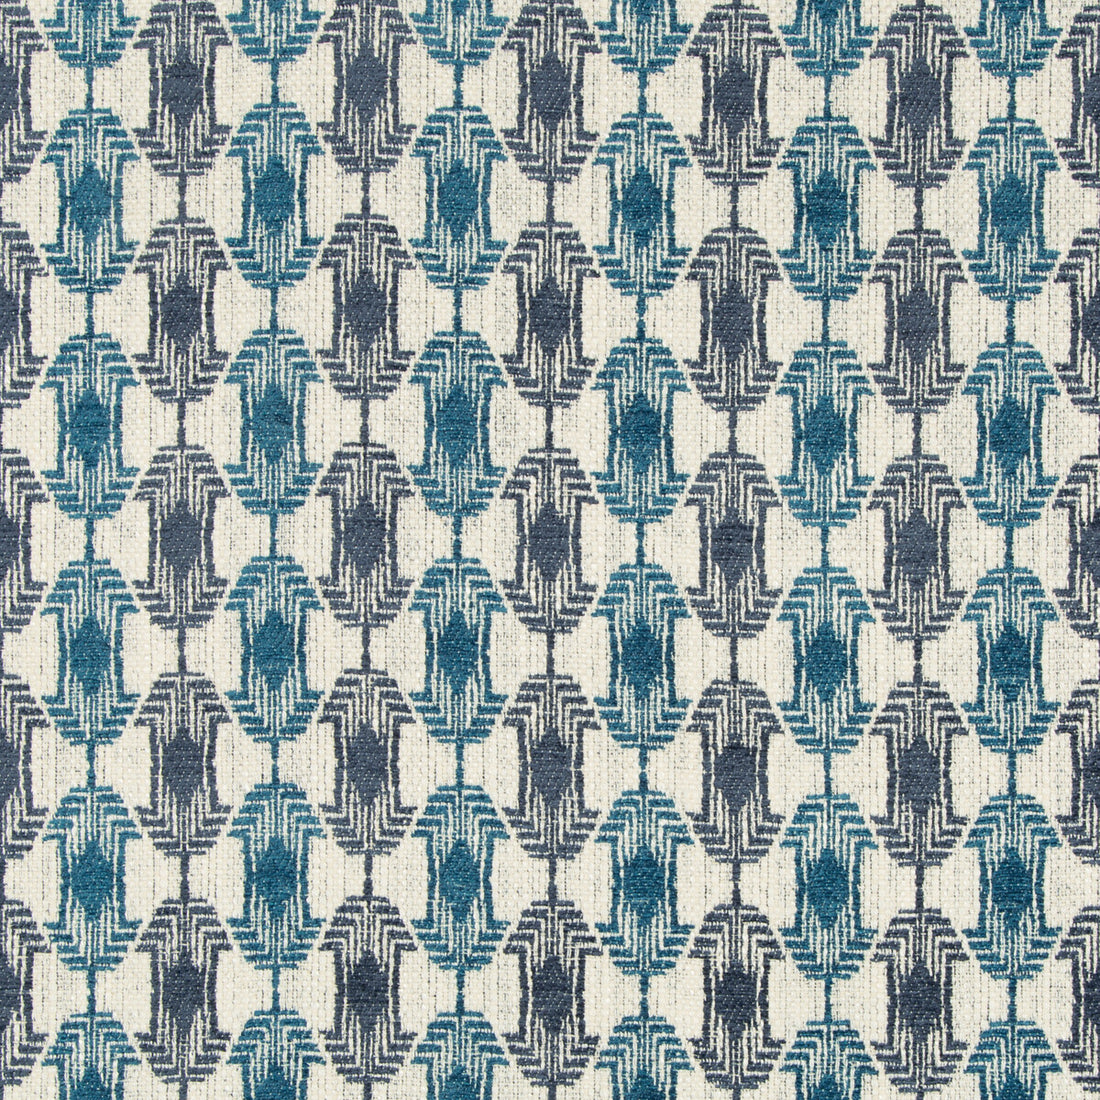 Quartz Weave fabric in deep sea color - pattern GWF-3751.5.0 - by Lee Jofa Modern in the Gems collection